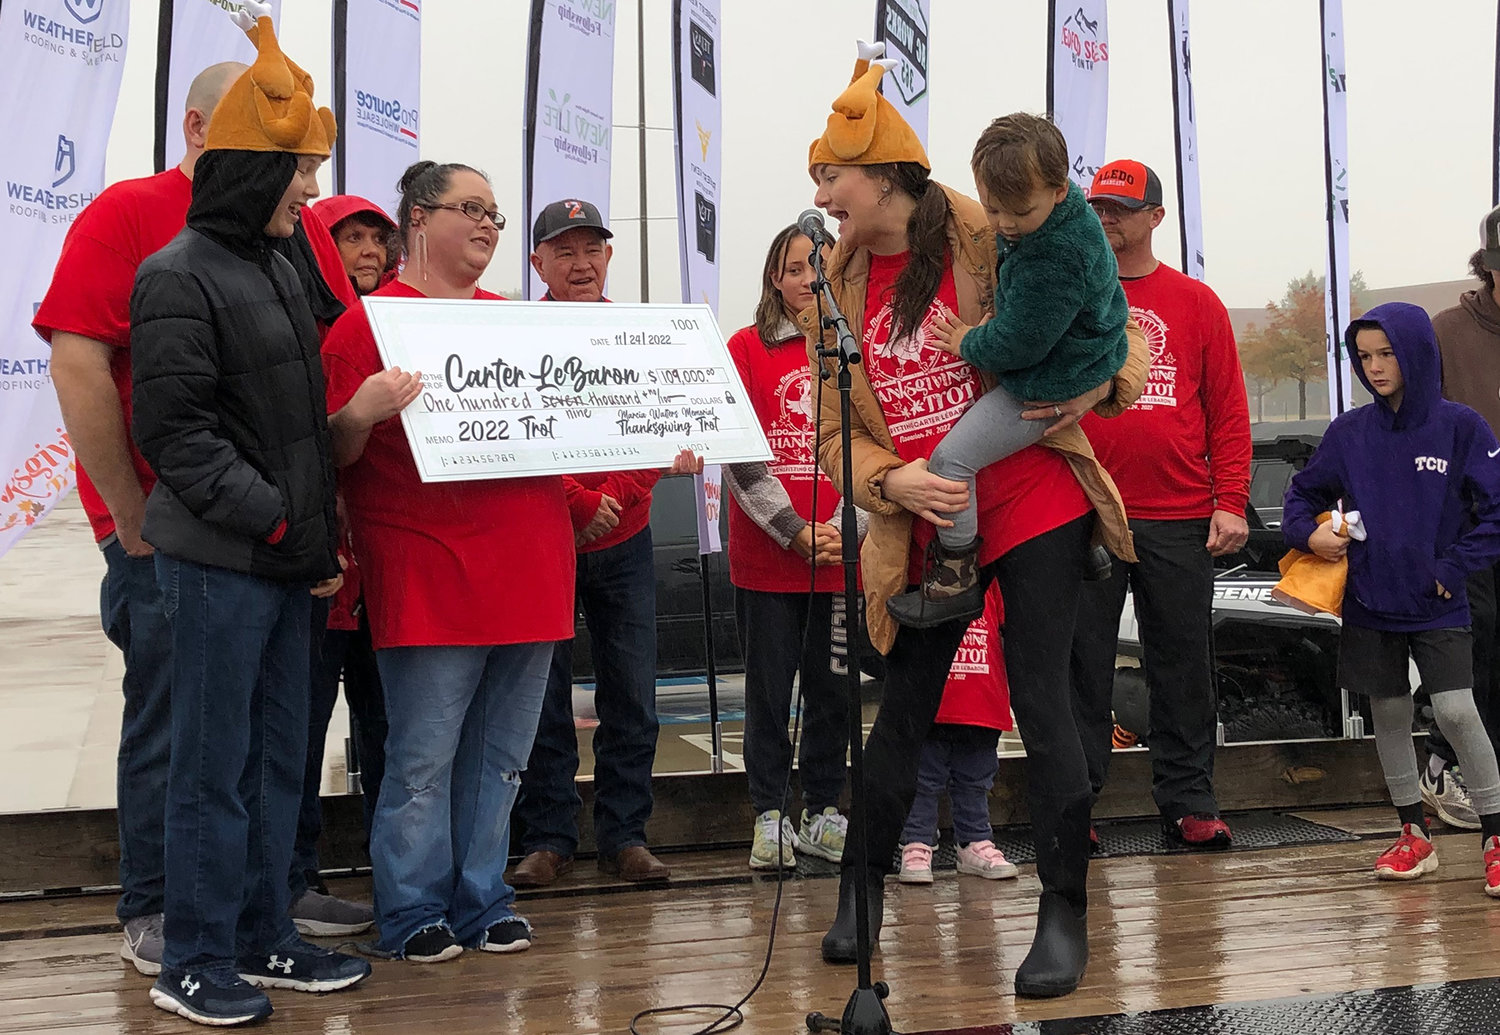 Carter LeBaron and his family react when presented with a check for $109,000, the proceeds from this year's Marcia Walters Memorial Thanksgiving Trot. Shown also are event co-chair and emcee Nikki Thompson and son, Tagg.